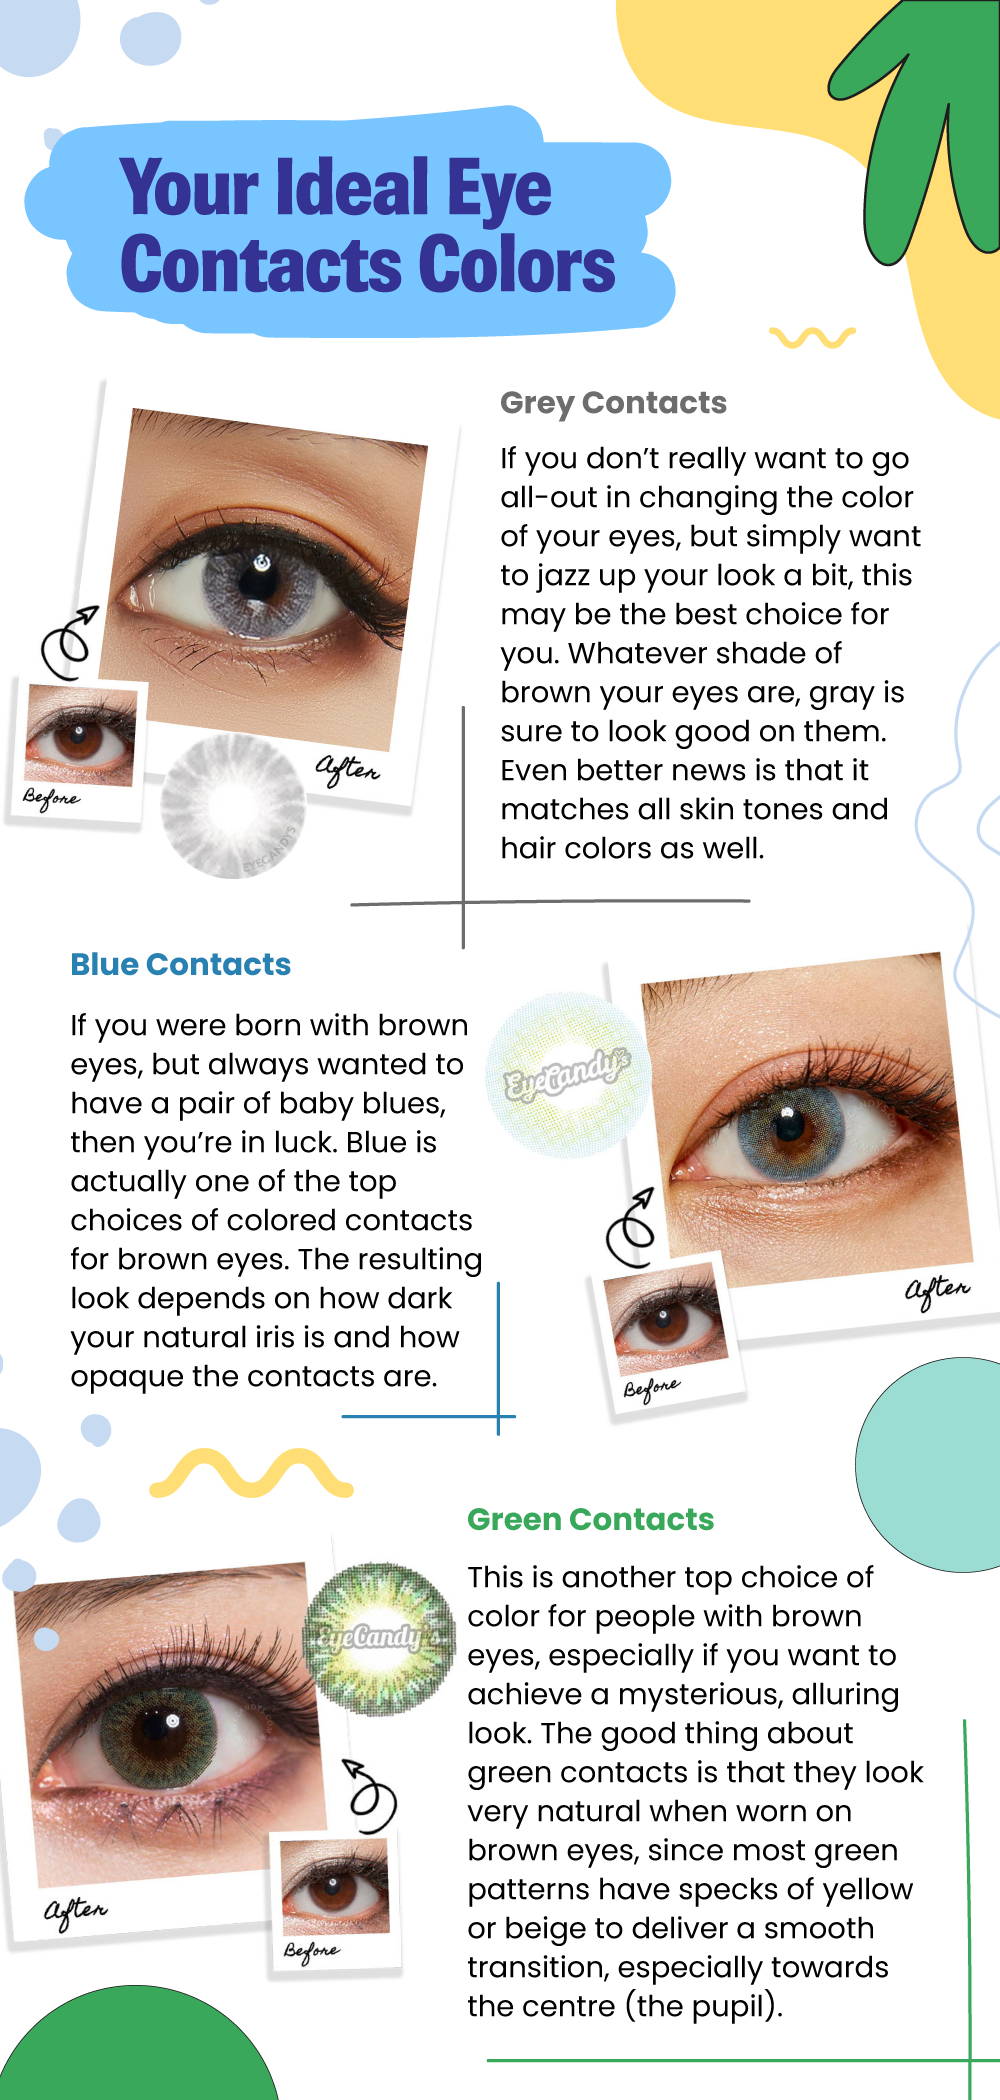 What Are The Most Natural Colored Contact Lenses?